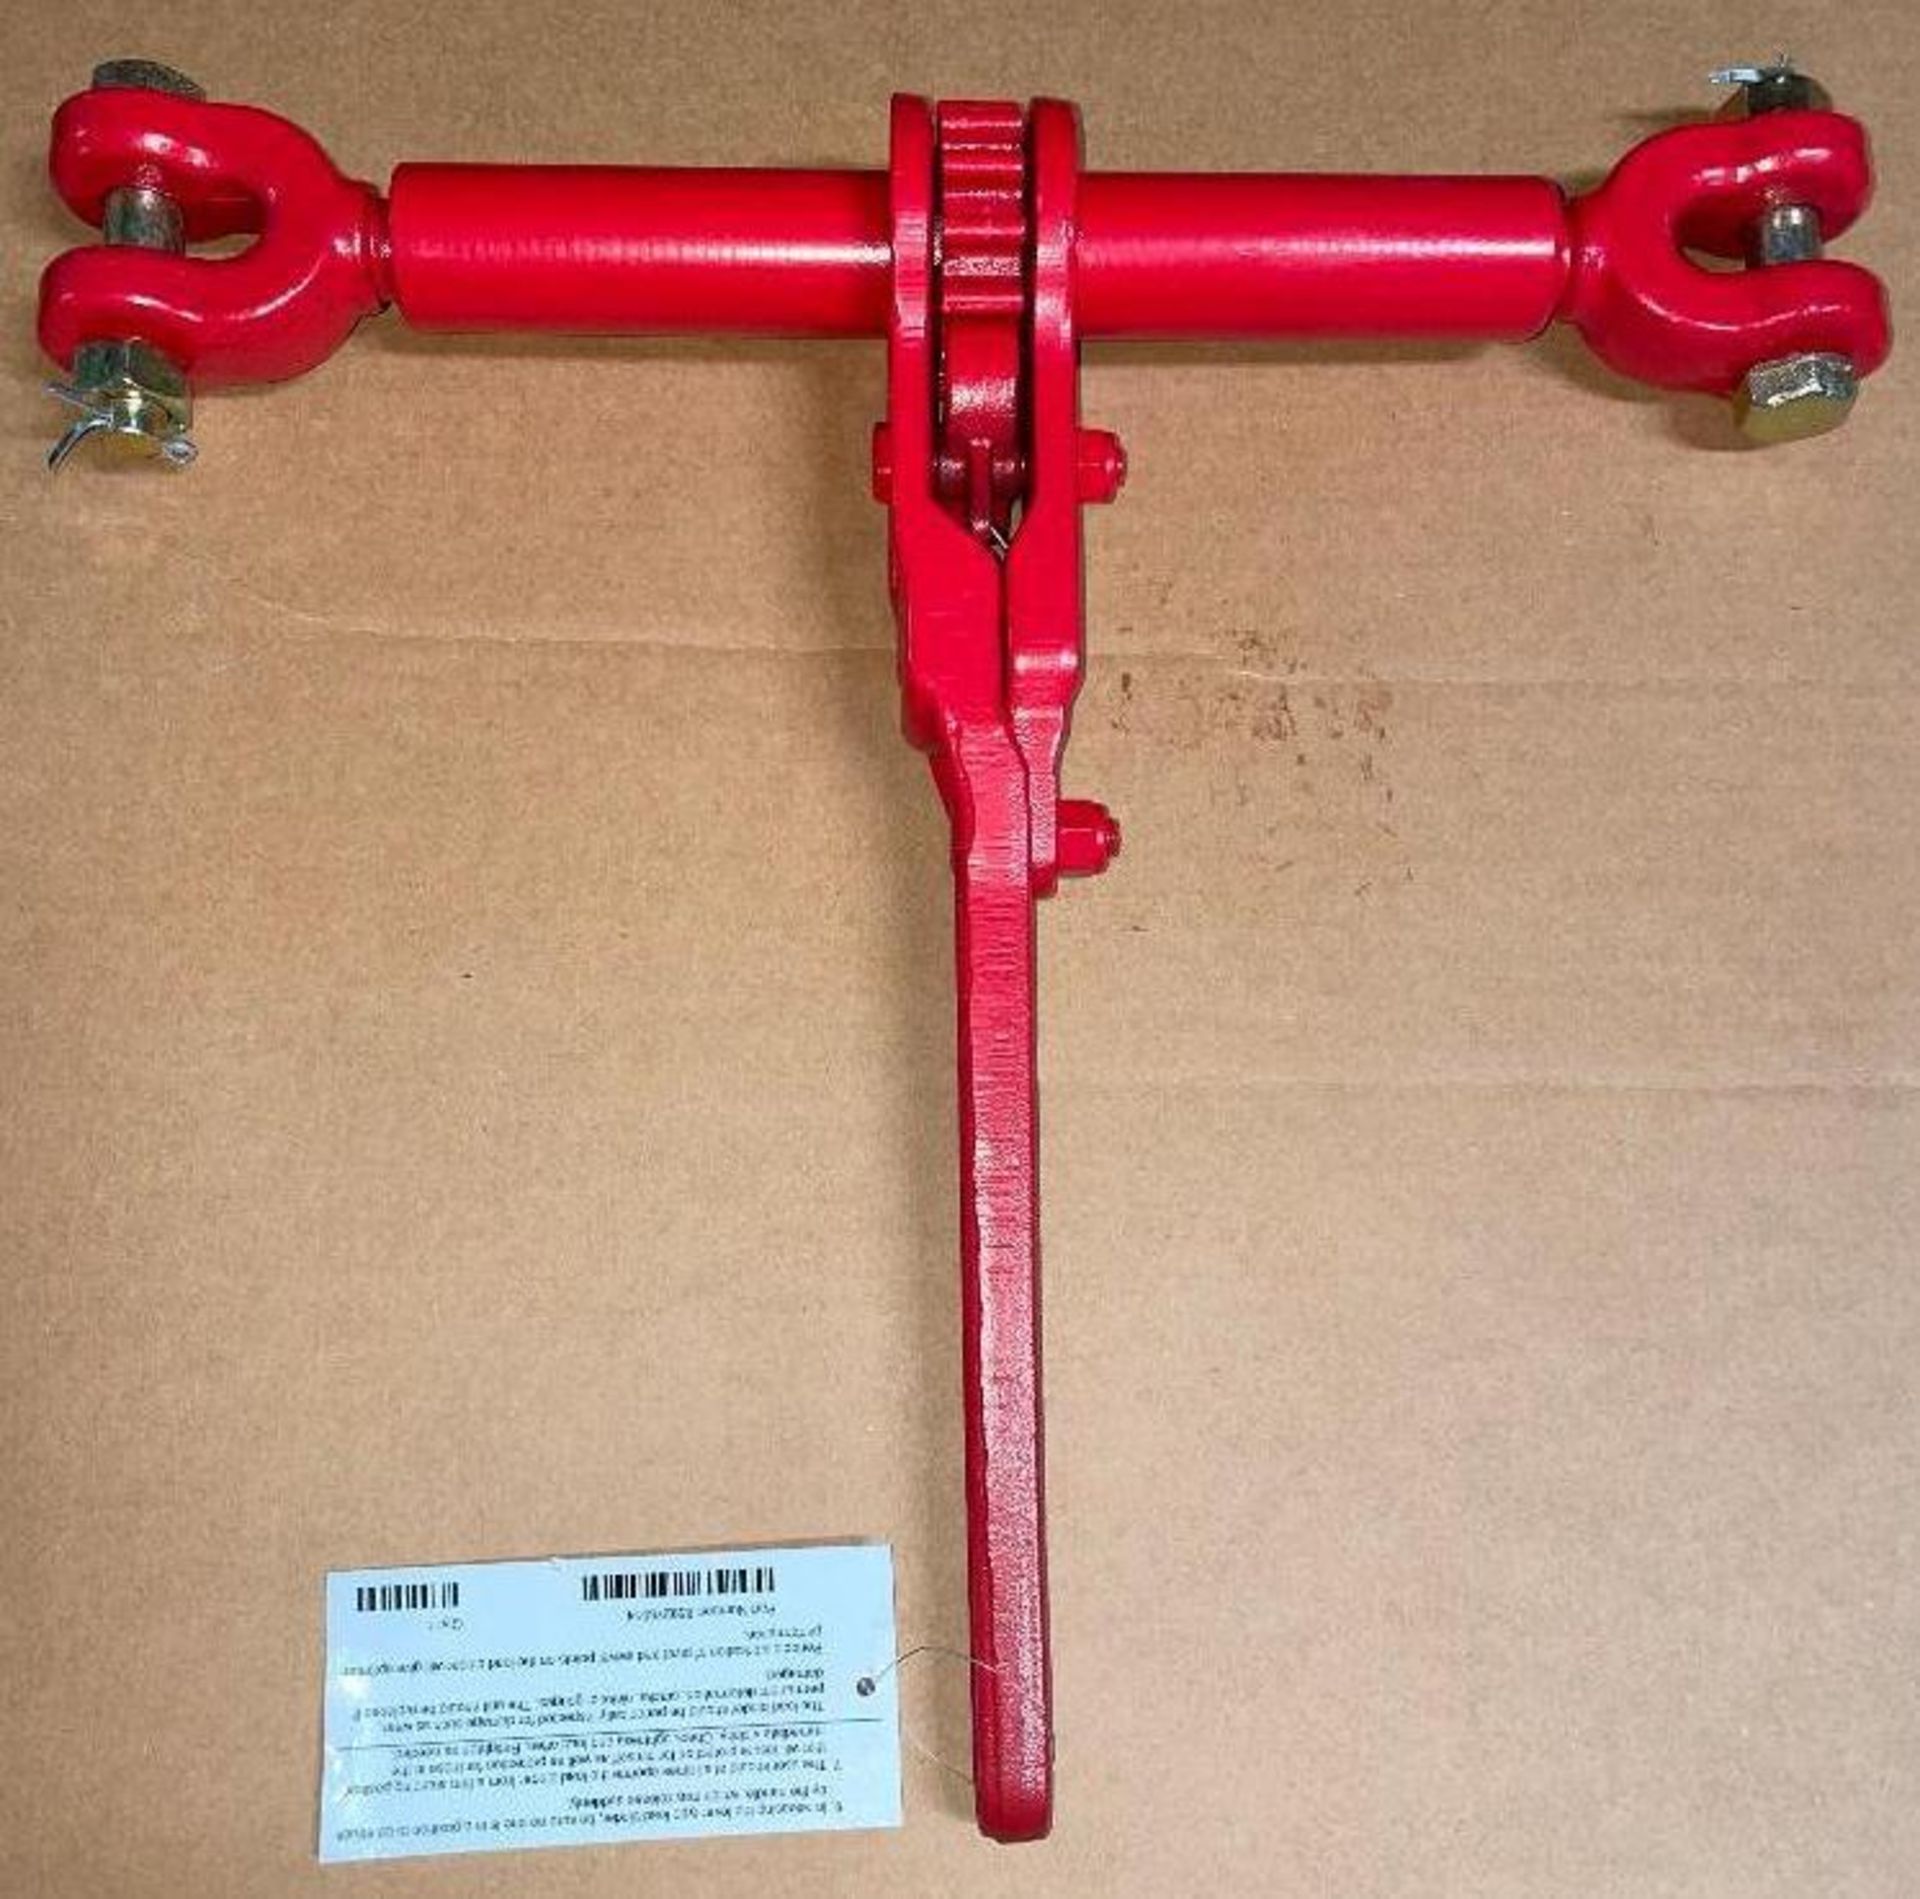 (120) HEAVY DUTY JAW BOLT RATCHET LOAD BINDER - WHOLE PALLET BRAND / MODEL: LACLEDE CHAIN MFG CO 859